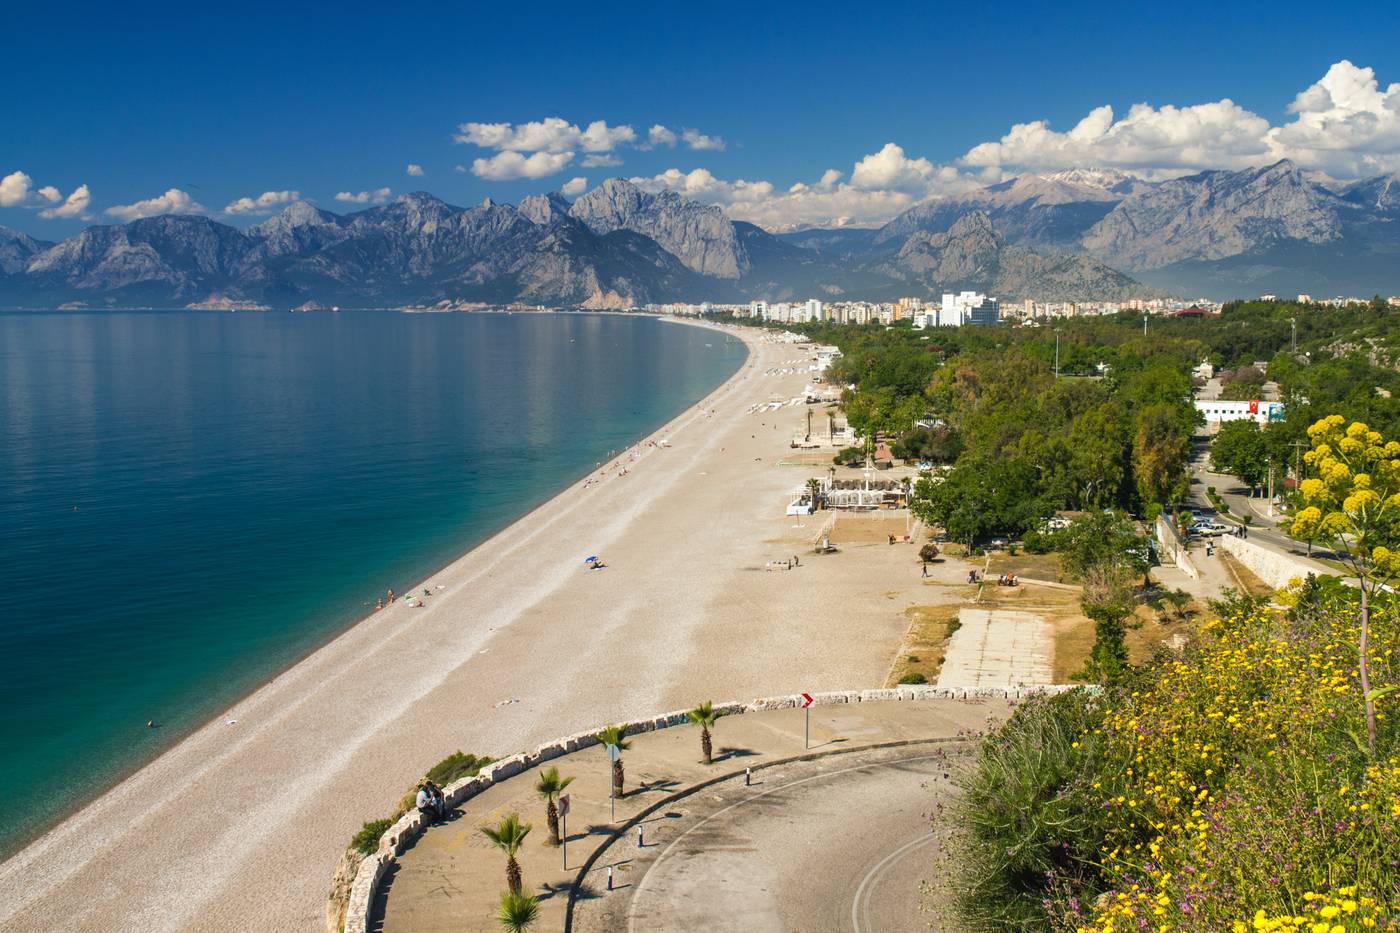 Beach in Antalya with mountains in the background.